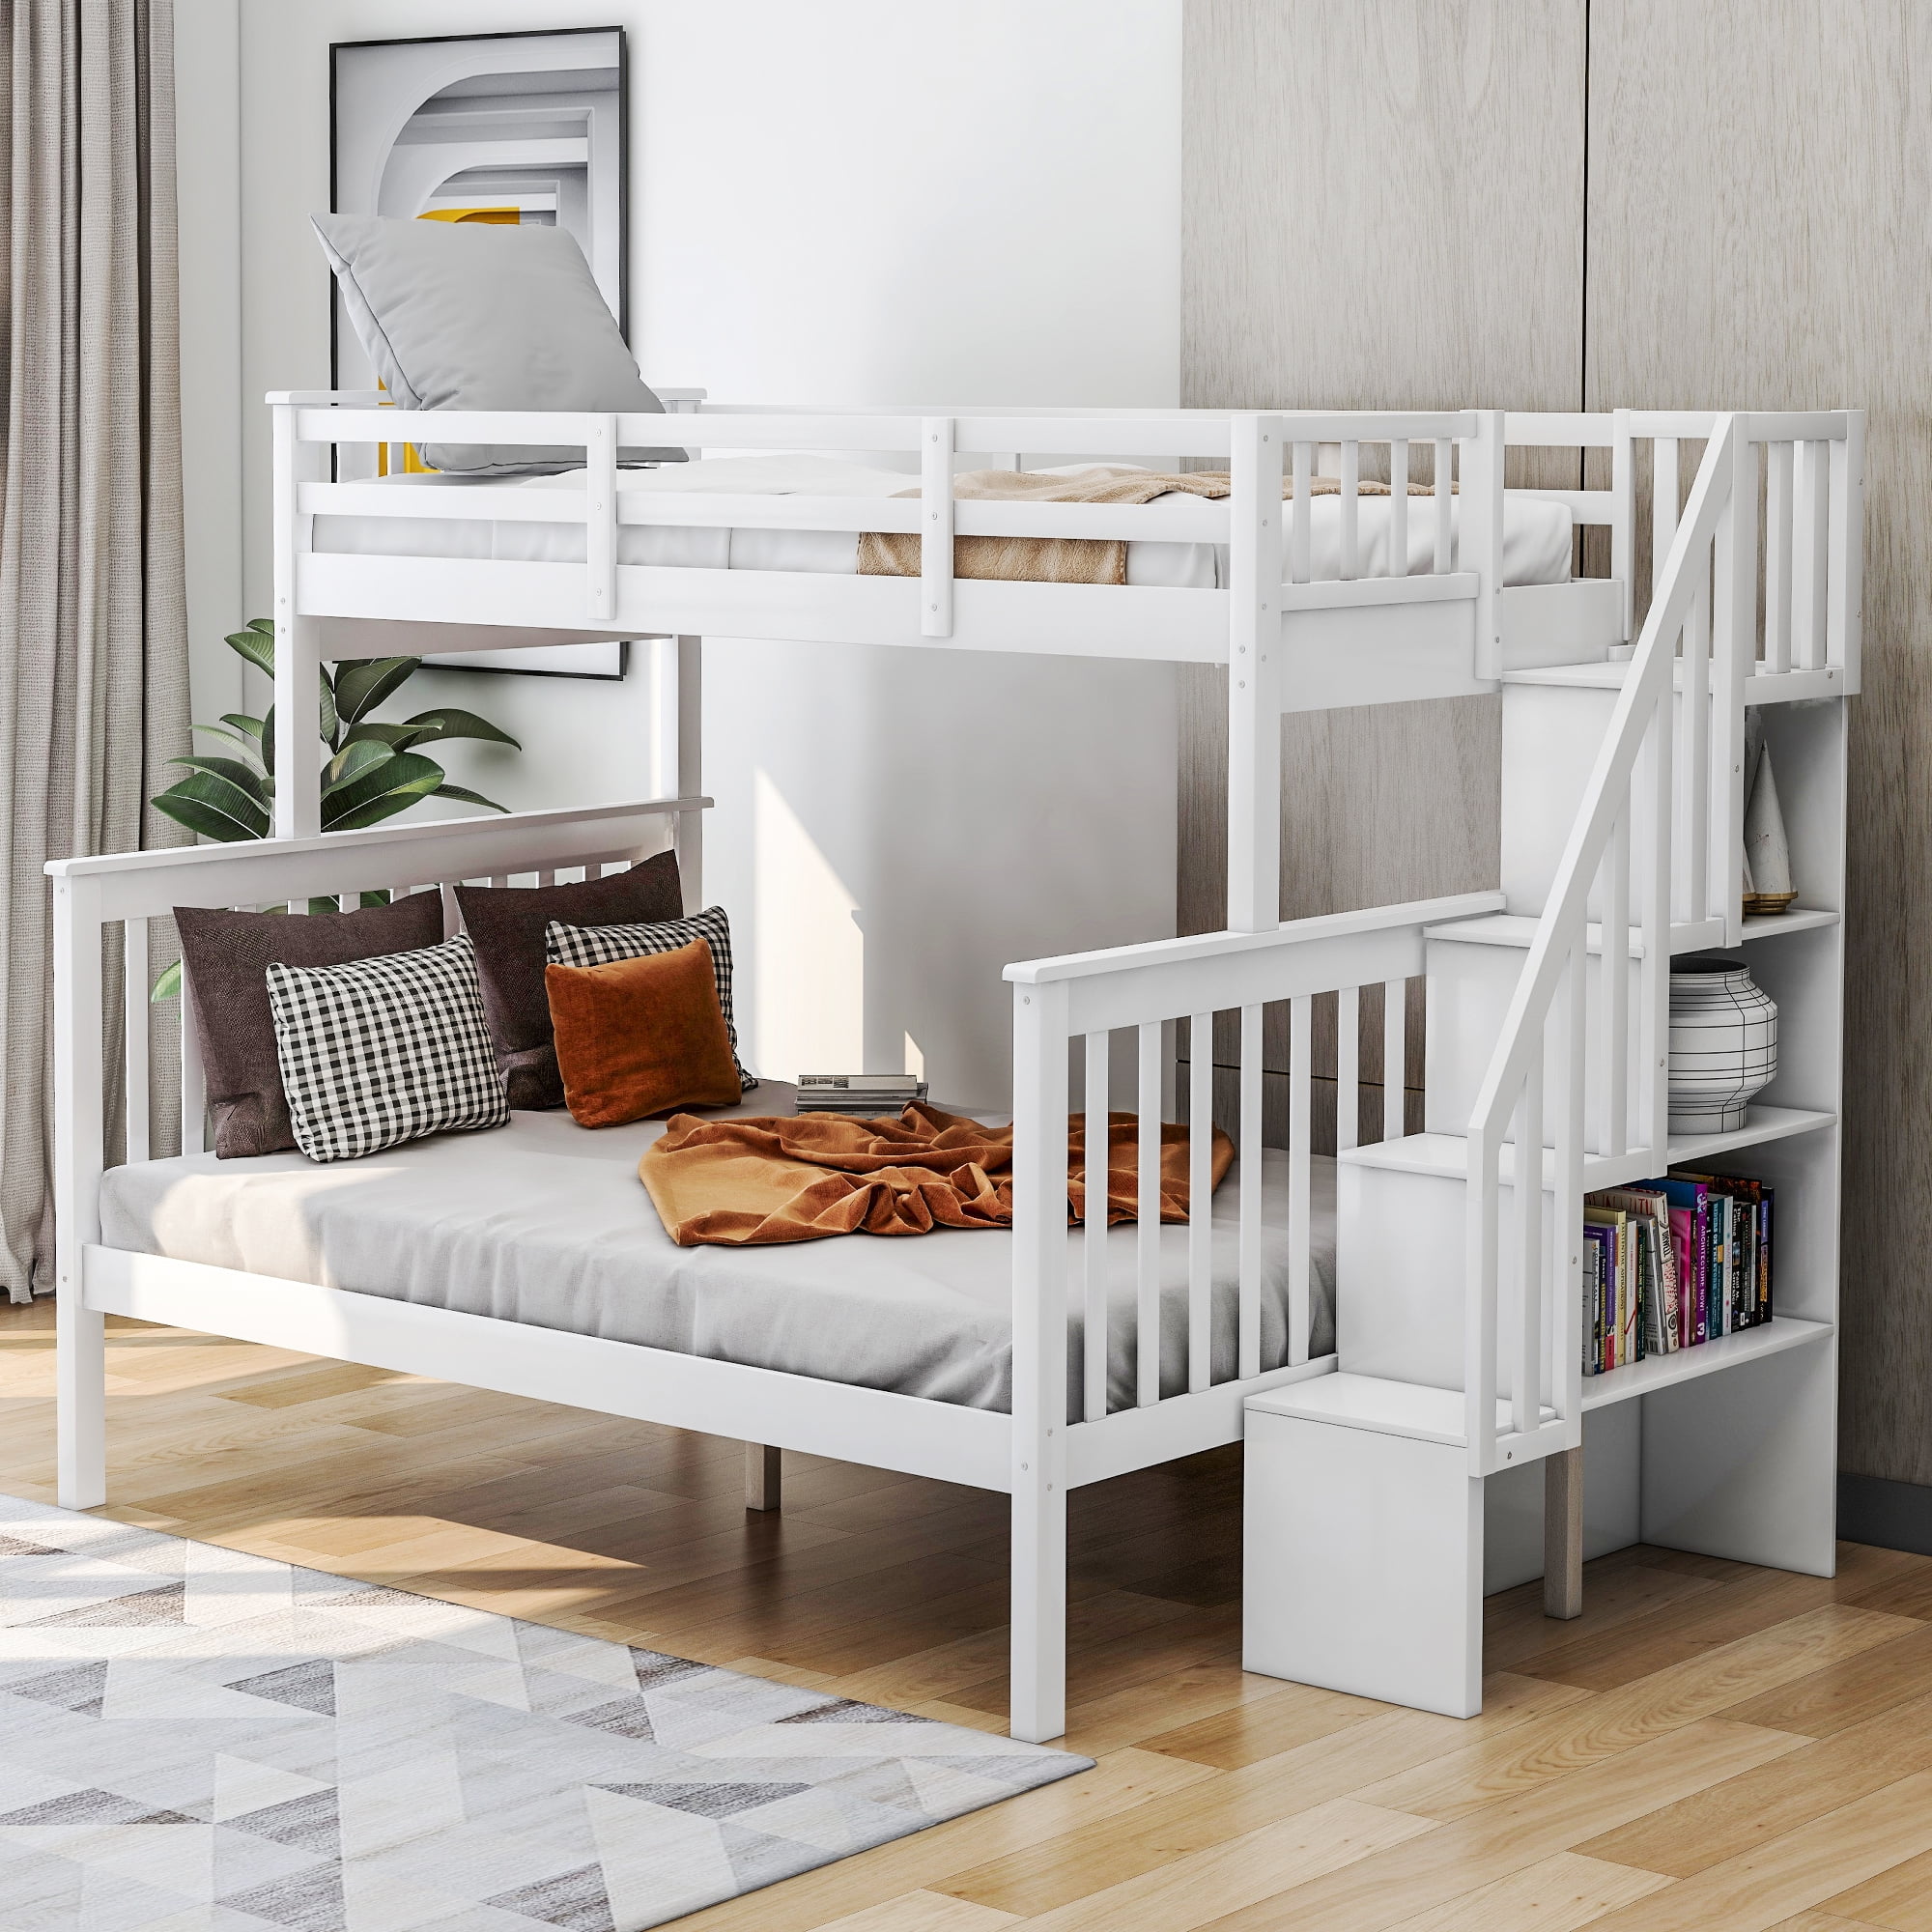 Kids Bunk Beds For Boys Girls Twin, Youth Bunk Beds